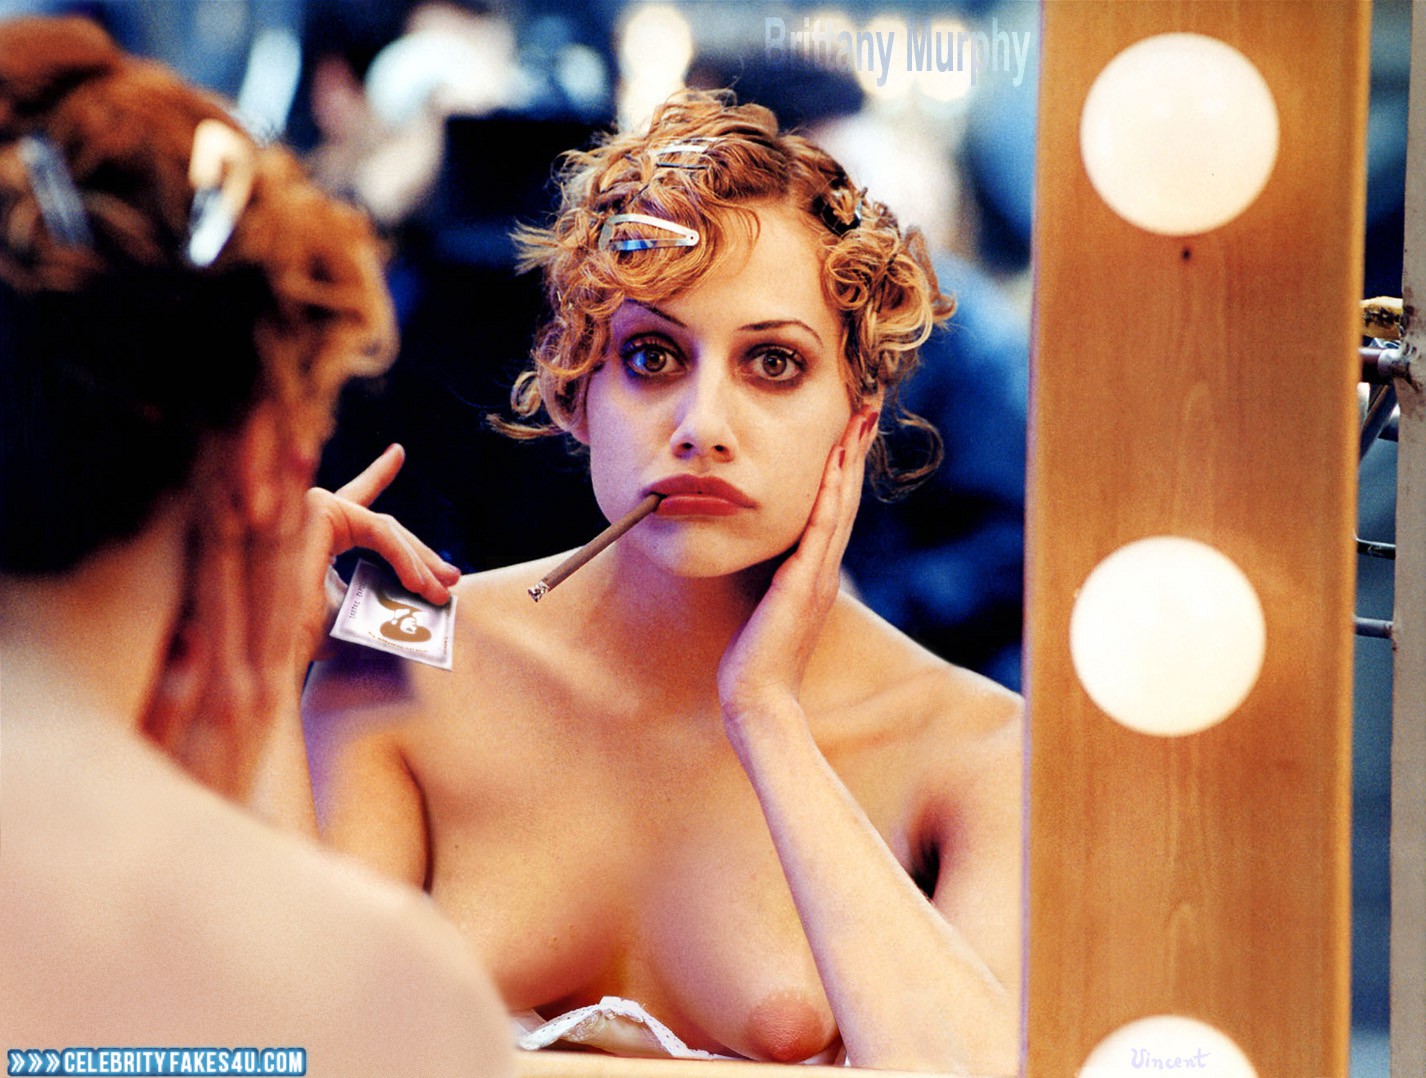 Brittany Murphy Nude Naked Porn - Brittany Murphy Boobs Porn 001 Â« Celebrity Fakes 4U